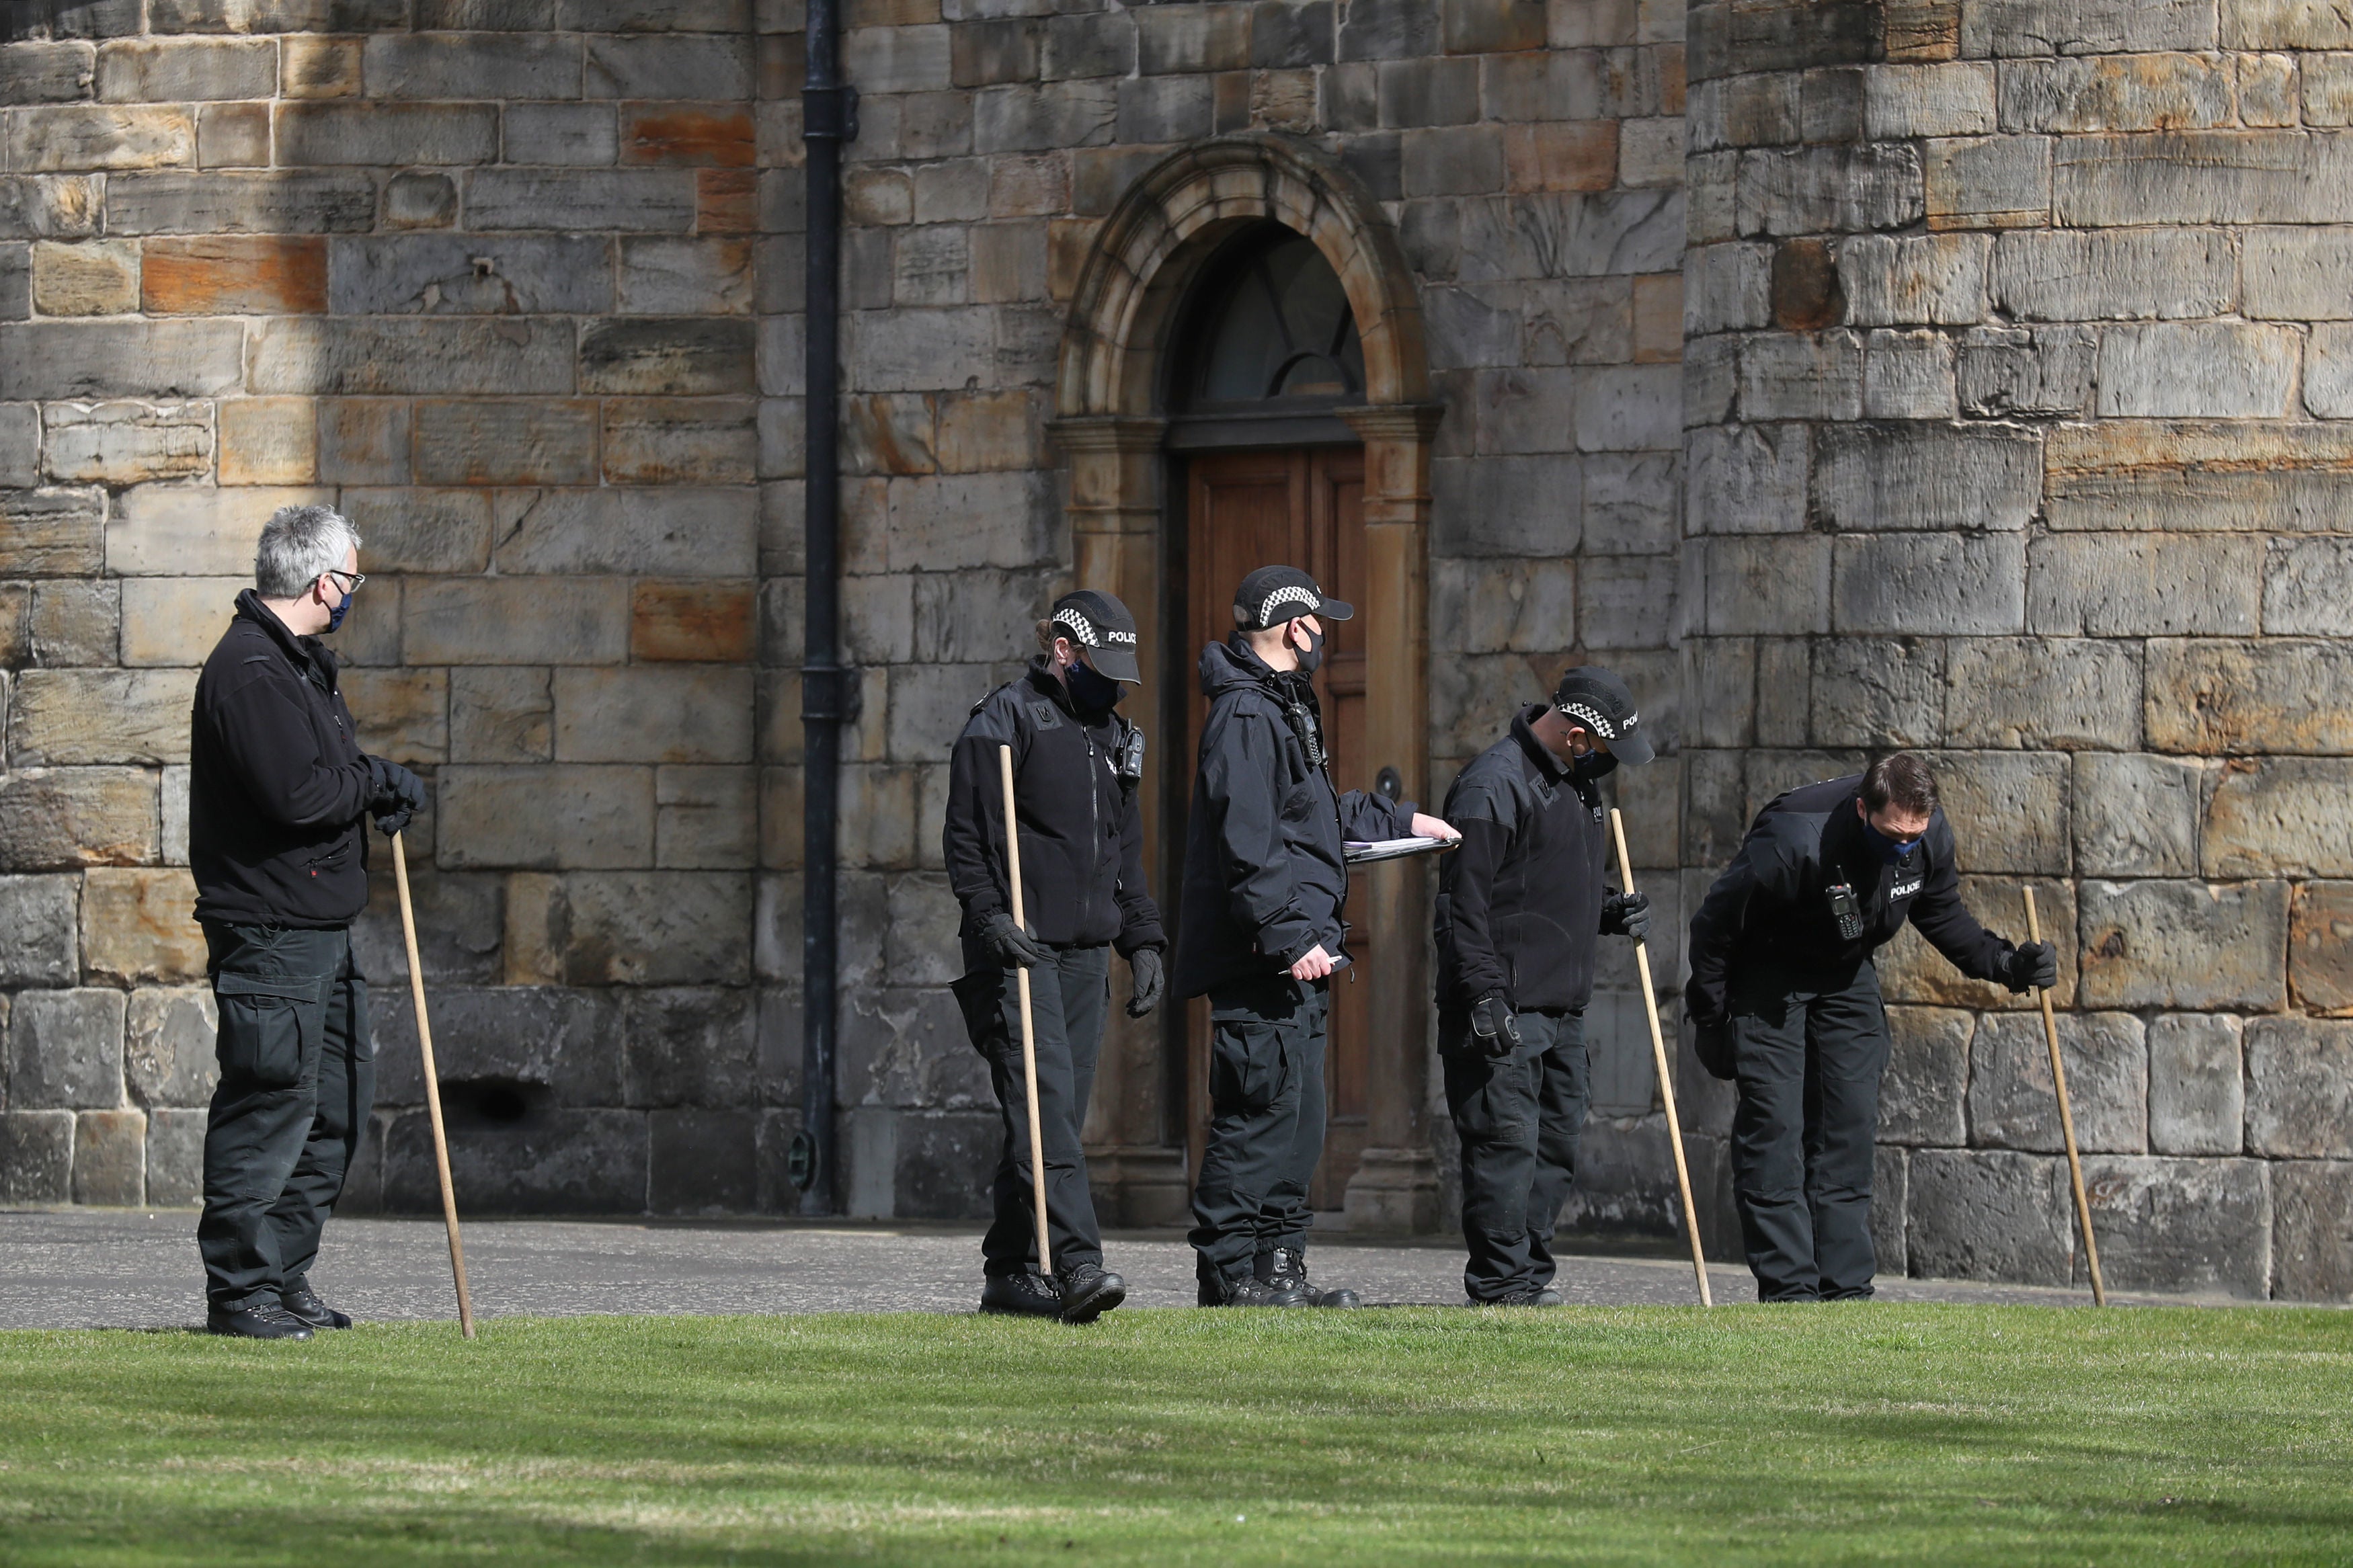 Police officers search within the grounds of the Palace of Holyroodhouse in Edinburgh after a bomb disposal team was called to a ‘suspicious item’ at the Queen’s residence